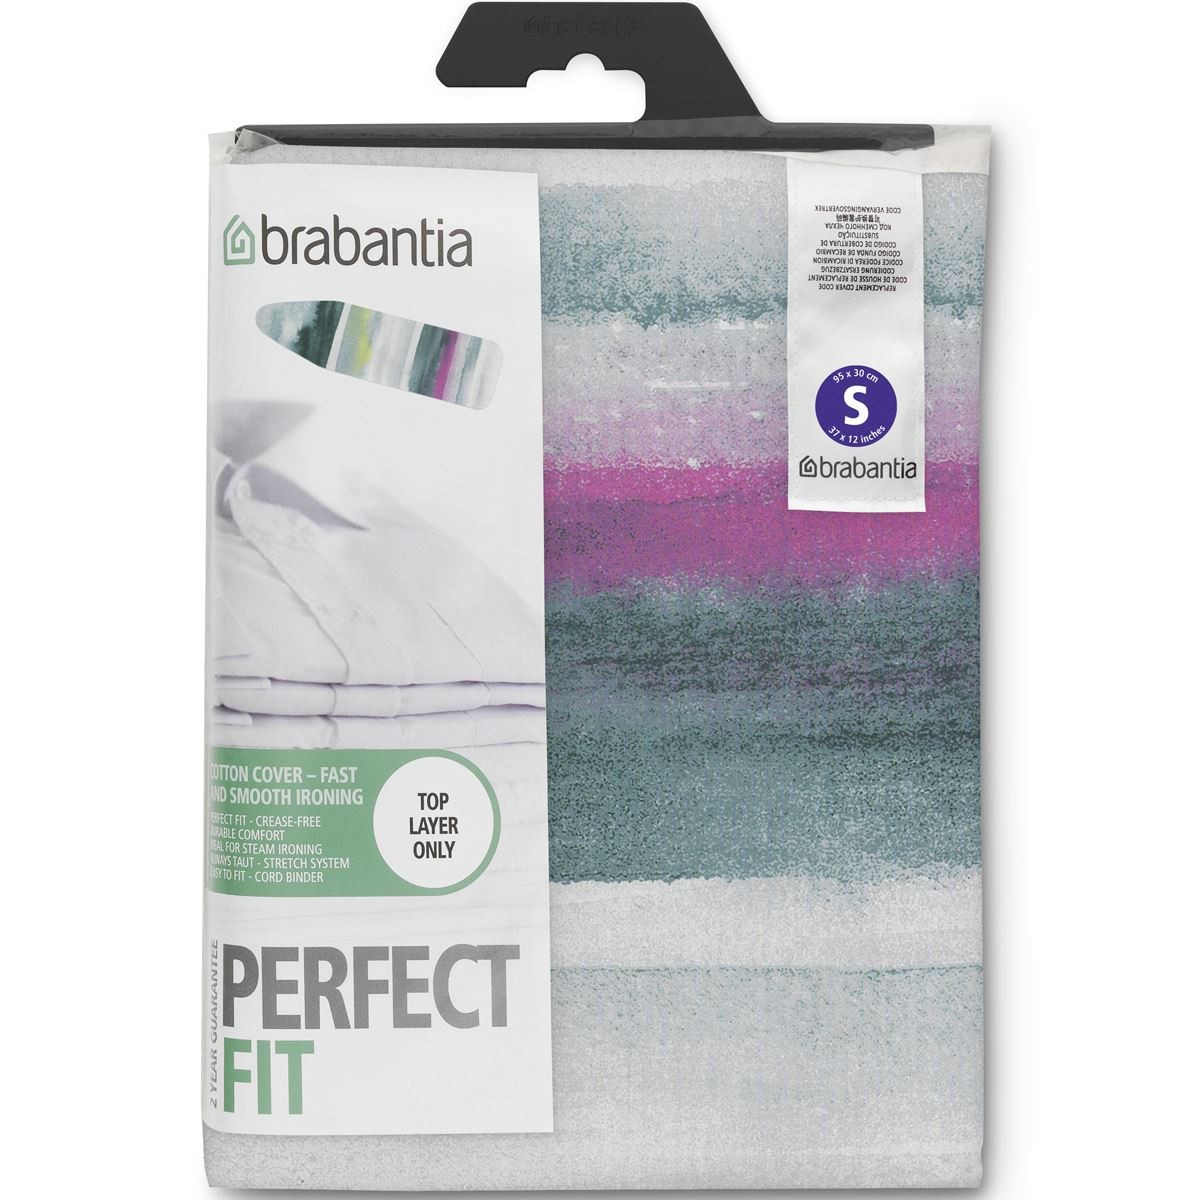 Brabantia Tabletop Ironing Board S Cover